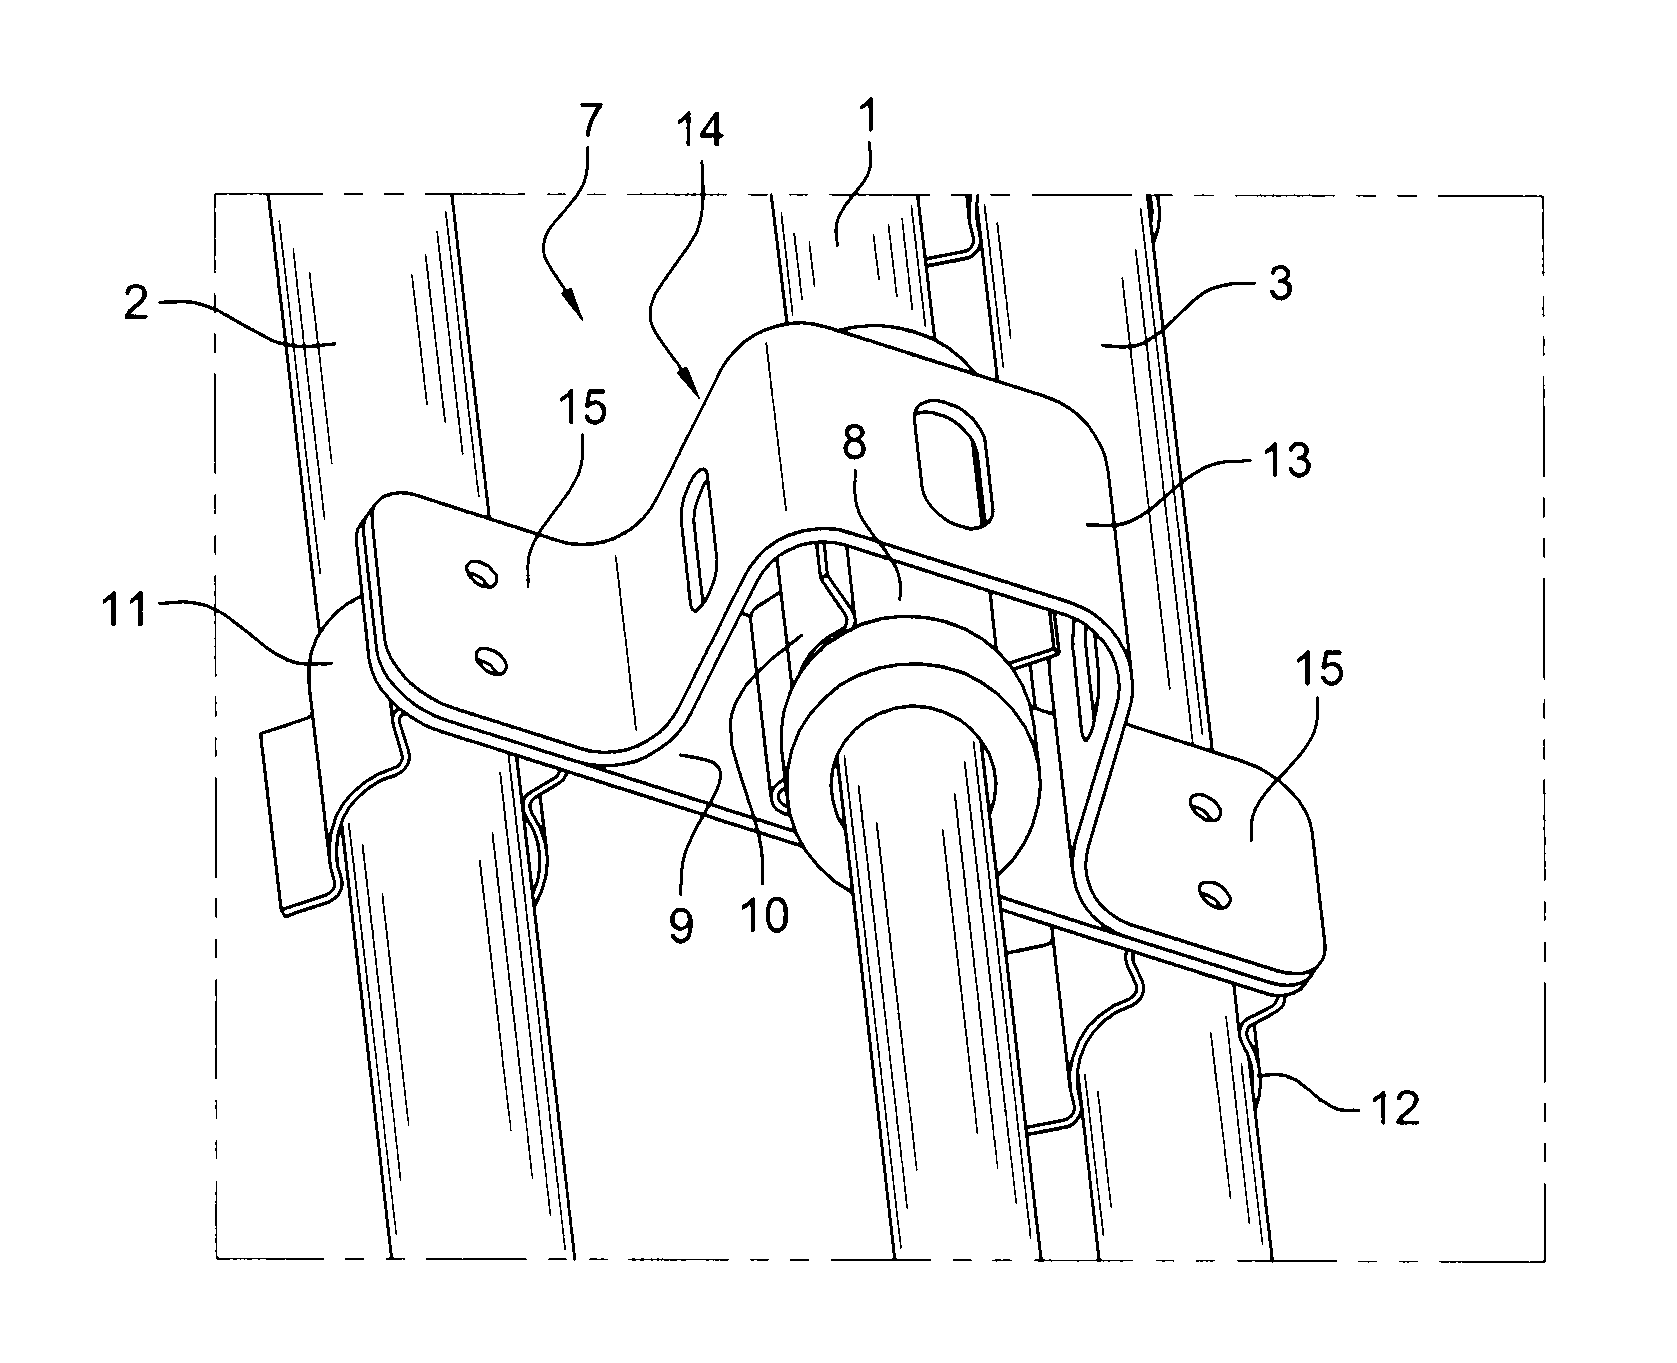 Device for spacing electrical harnesses in a turbomachine